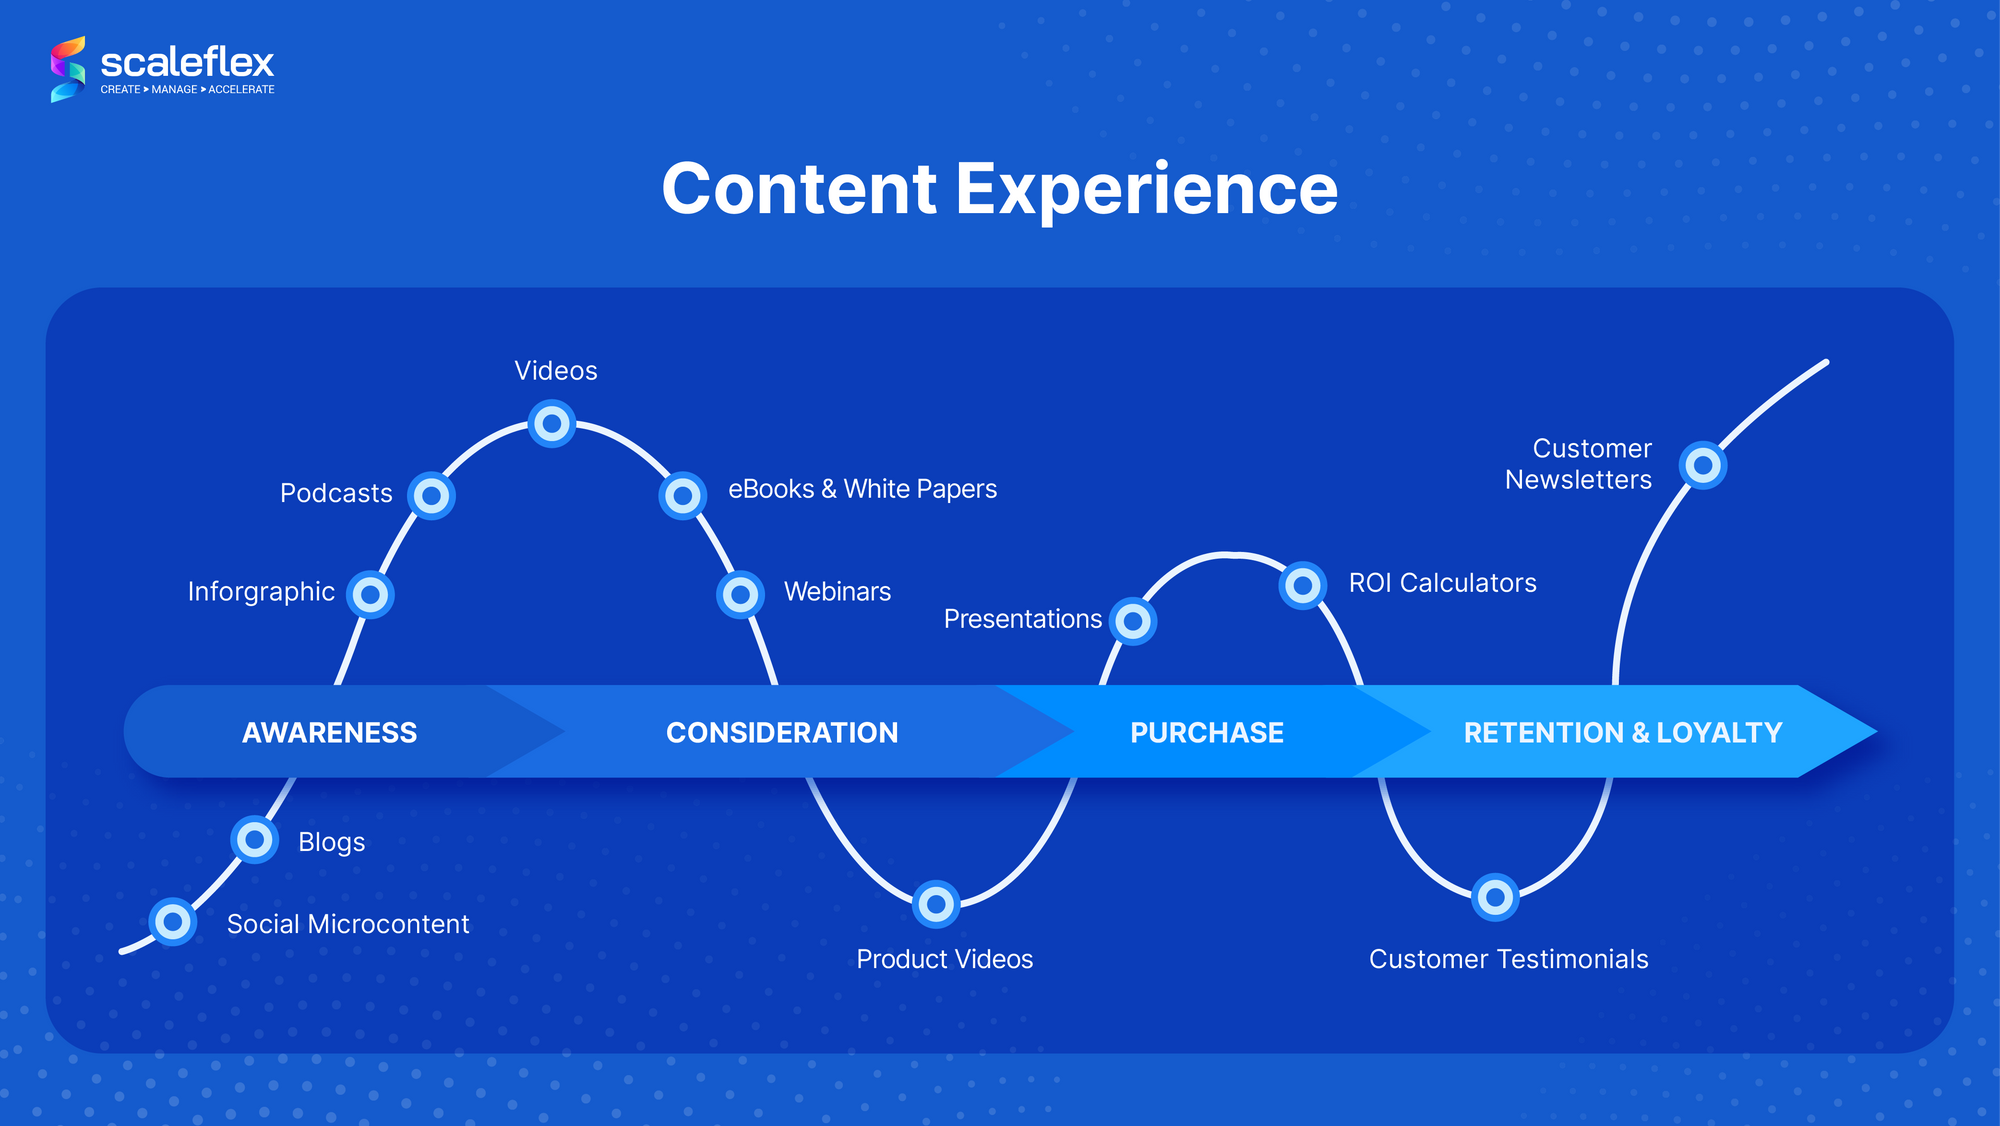 What is content experience?